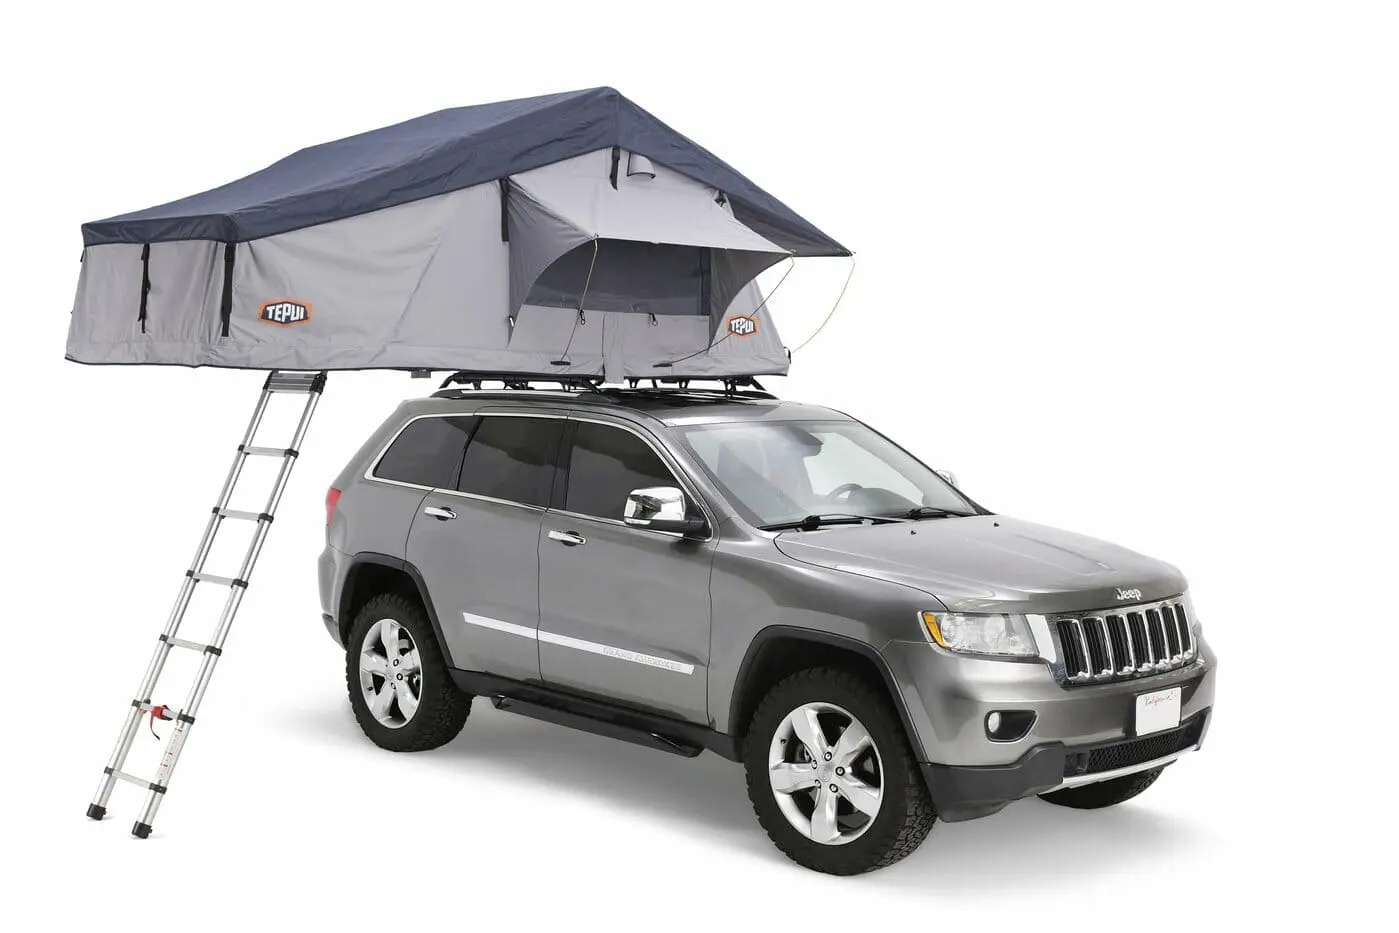 RTT Rooftop Tent mount on a Jeep.